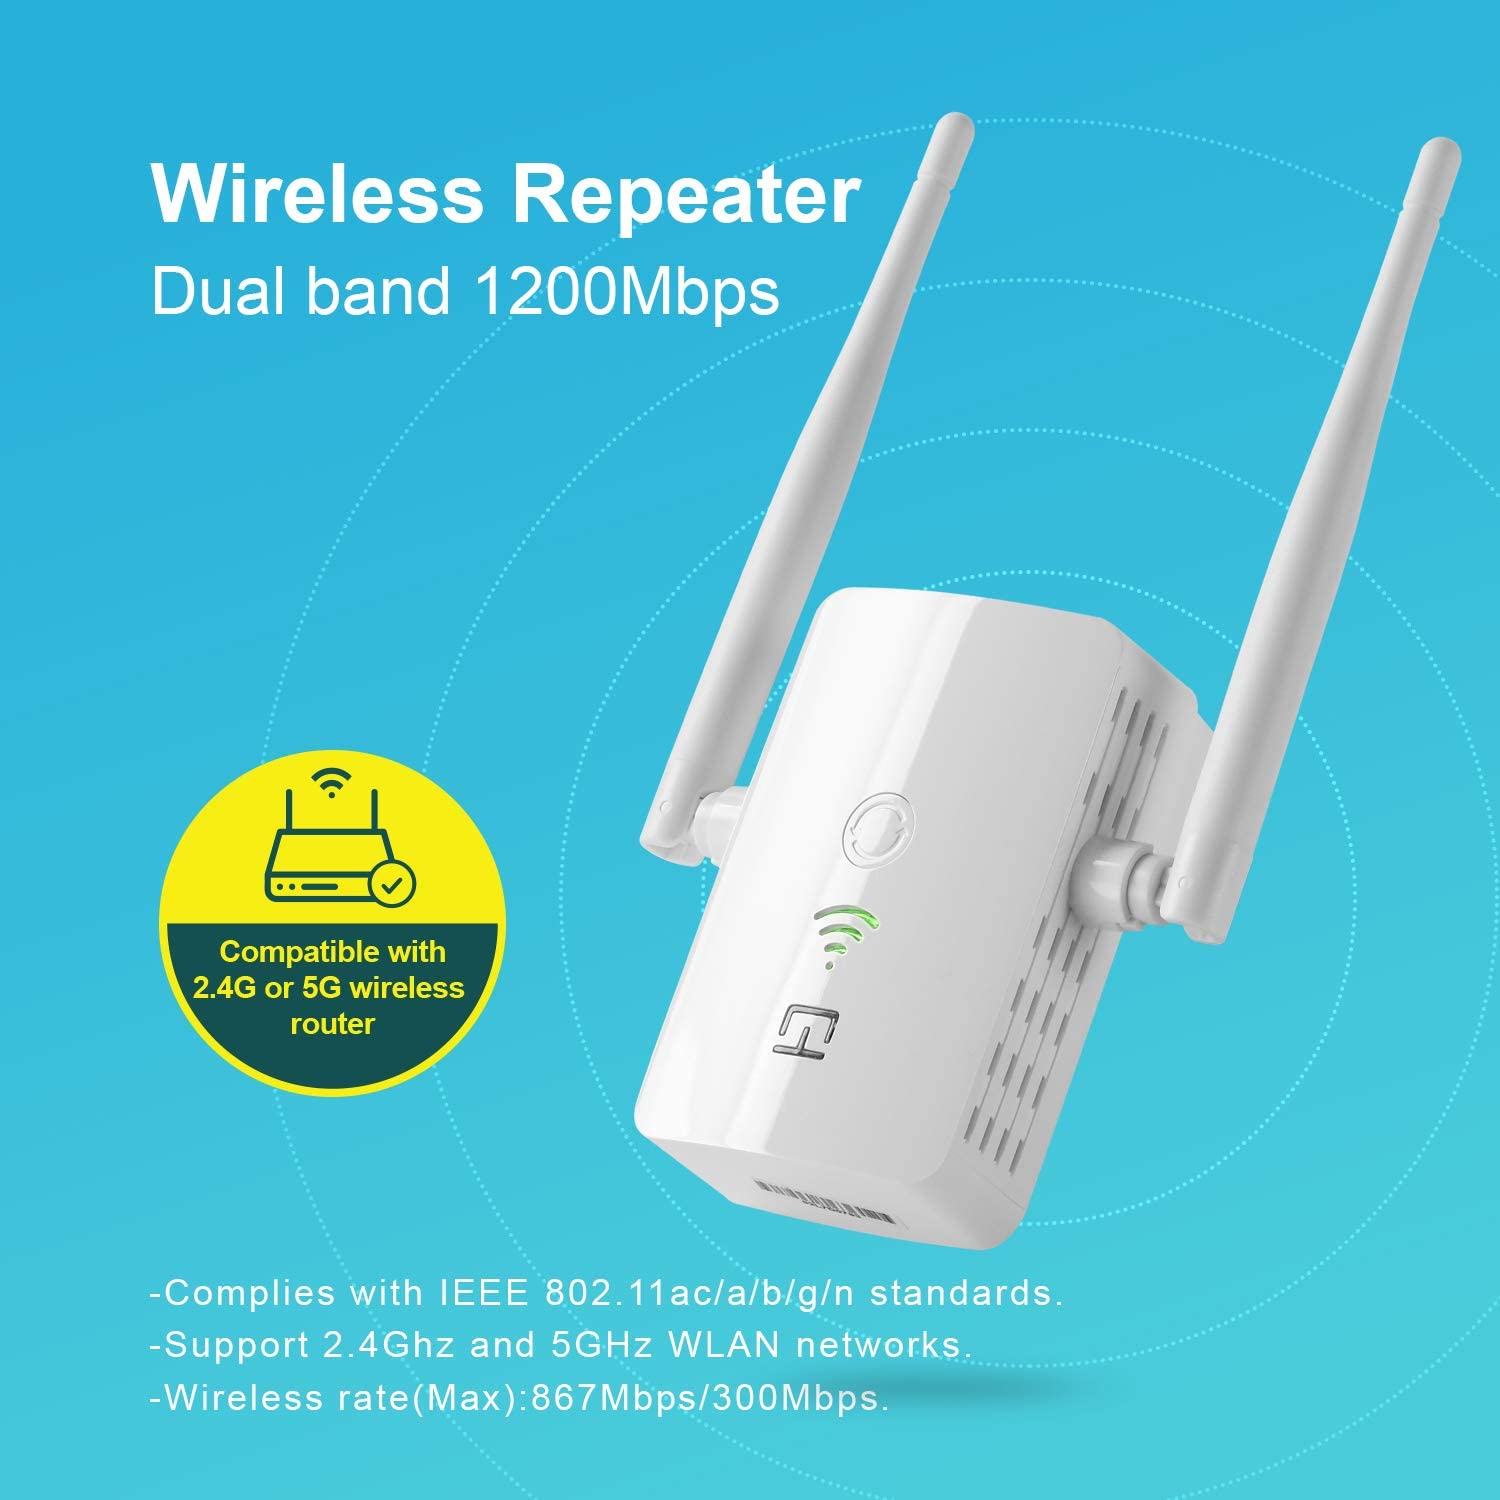 WiFi Range Extender, 2.4 & 5GHz Dual Band High Speed up to 1200 Mbps WiFi Repeater Wireless Signal Booster, Wide Coverage Eliminate WiFi Dead Zones, Support WPS 1 Button Setup with 2 External Antennas